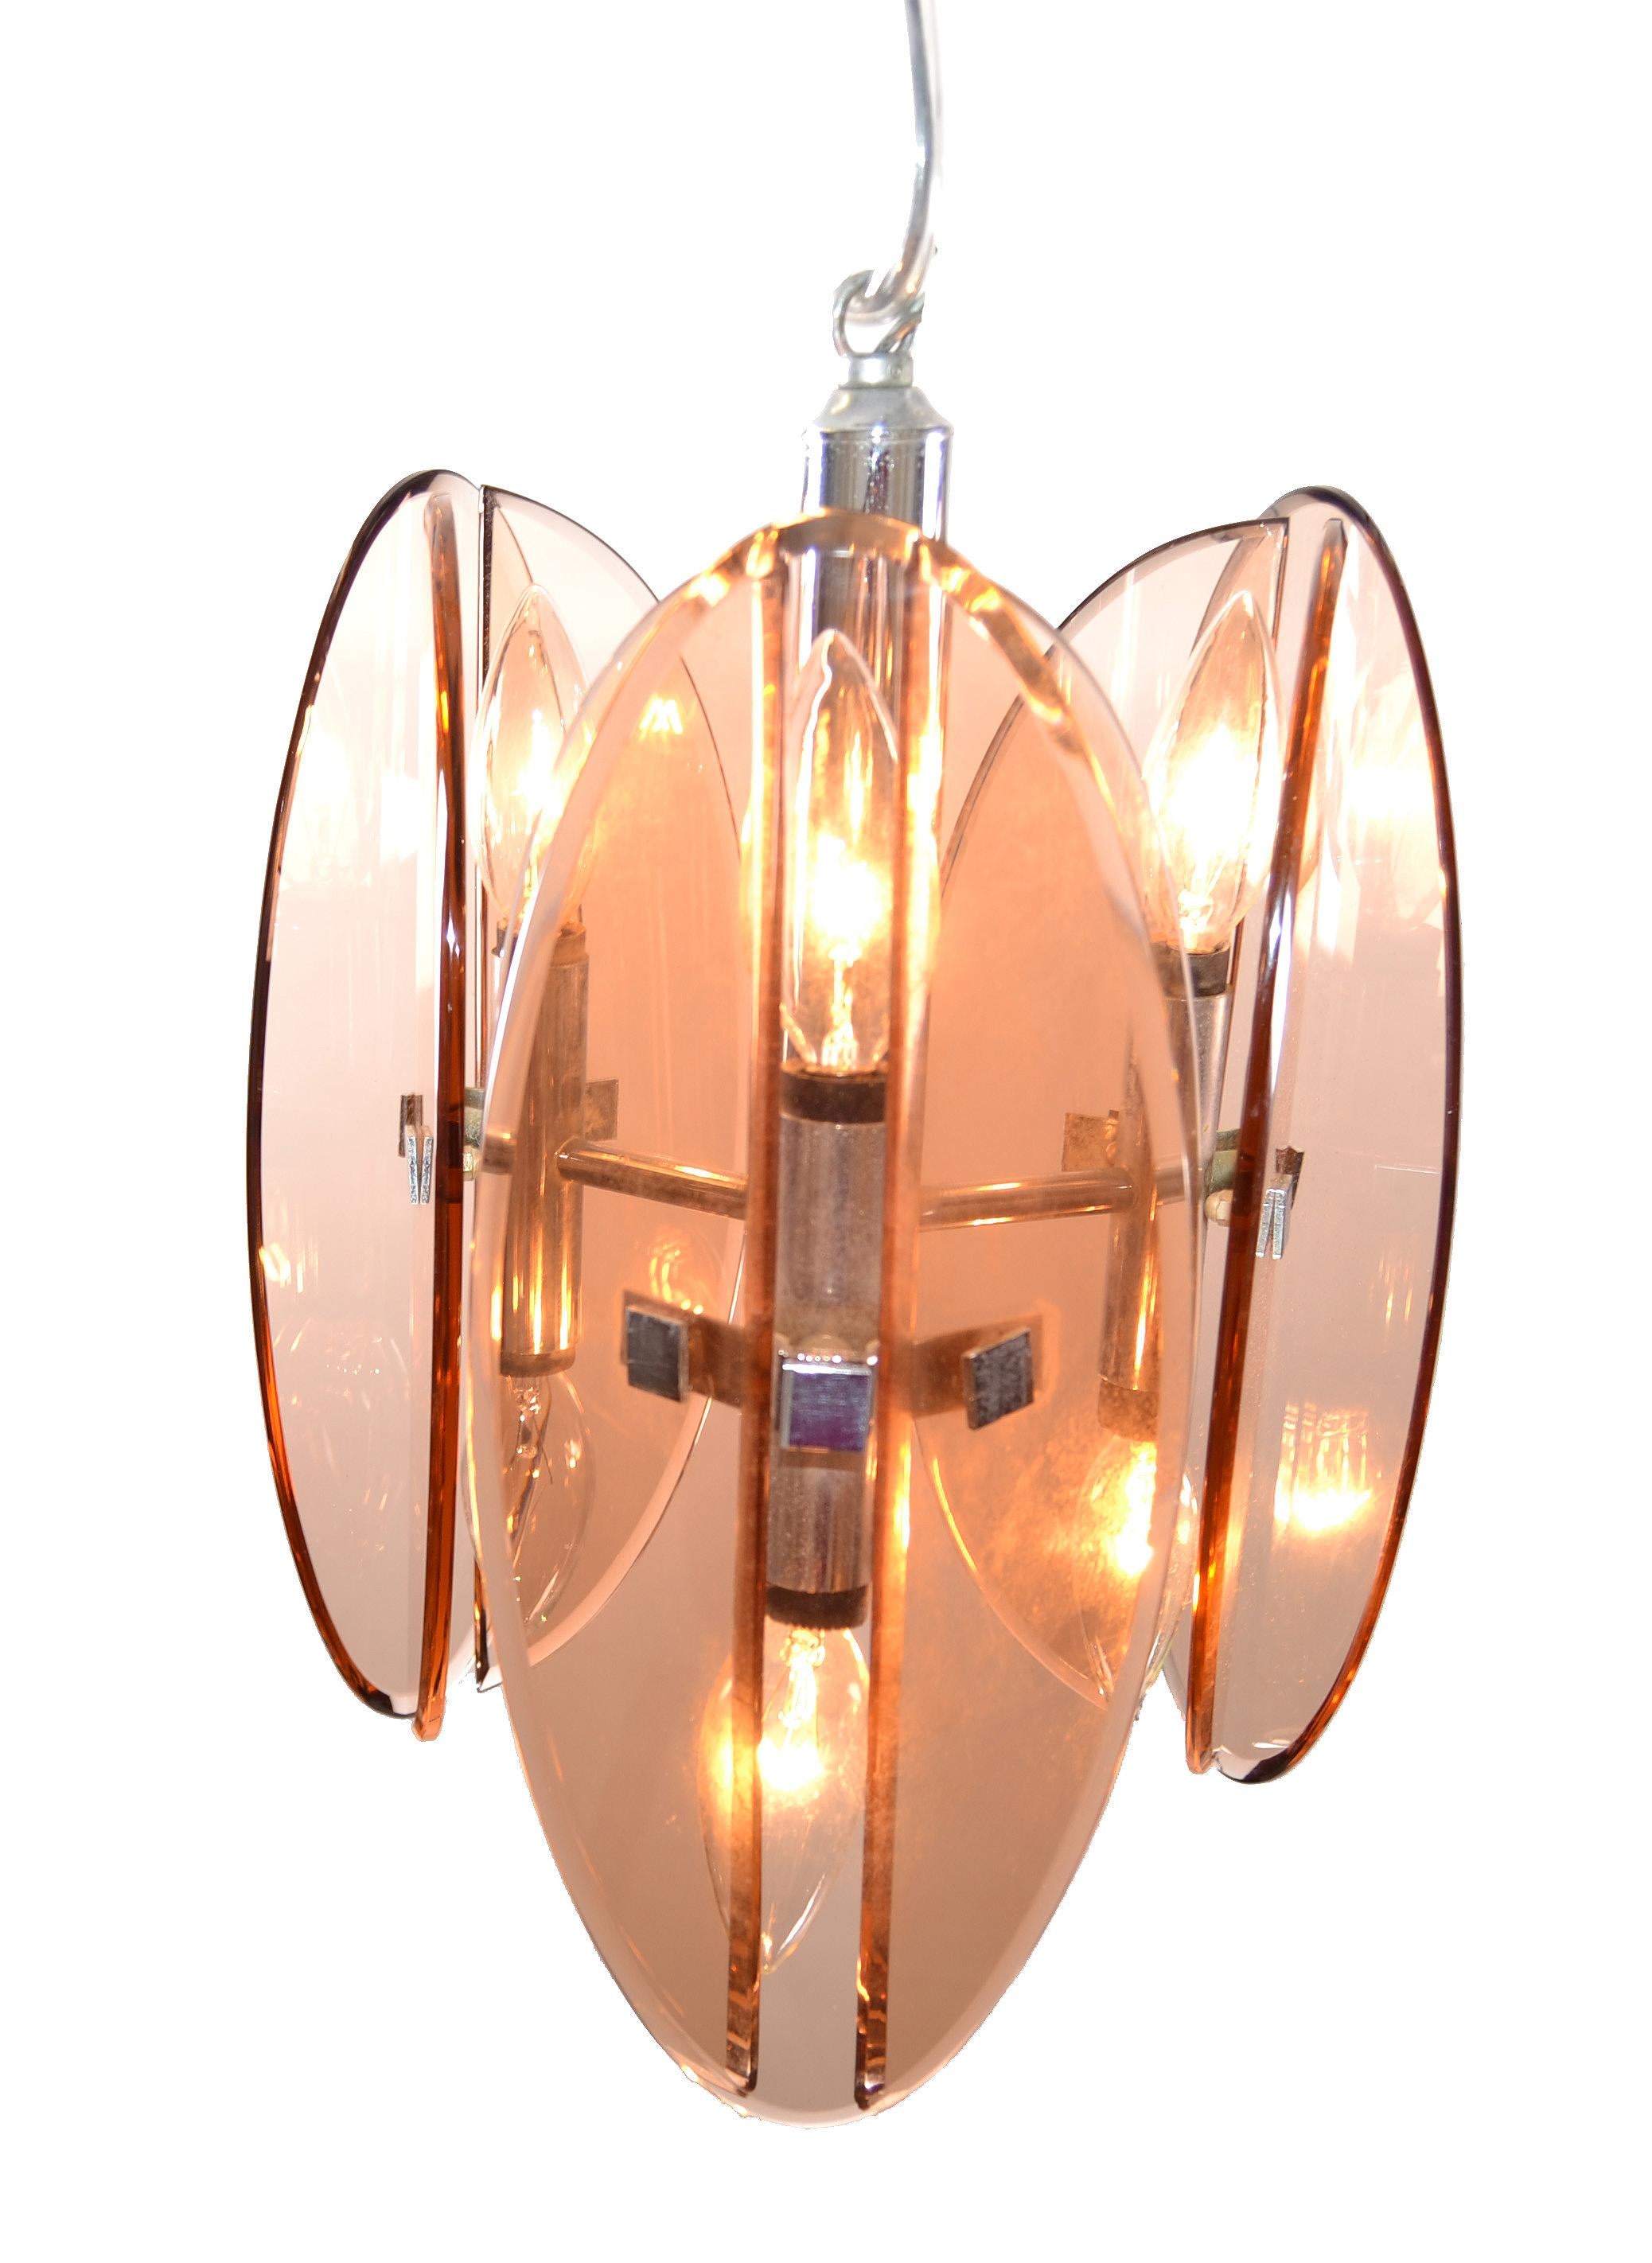 Original Mid-Century Modern 6-light chandelier by Veca made in Italy, 1970s.
Features rare pink glass panels in different shapes and mounted on a chrome frame.
US rewired and in working condition. 
Takes six candelabra light bulbs with max. 25